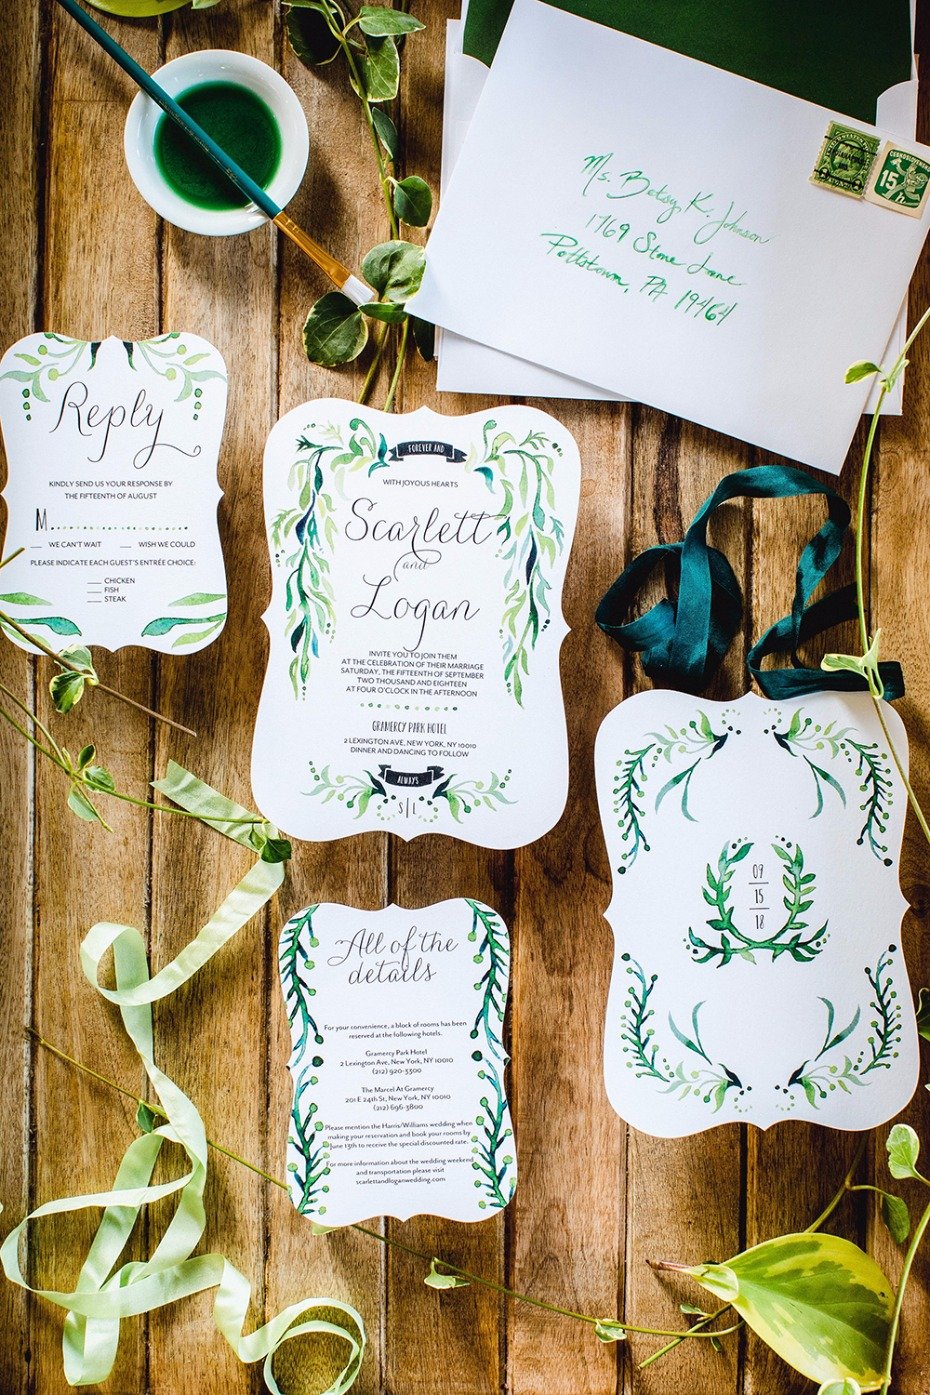 watercolor wedding invites from Shutterfly